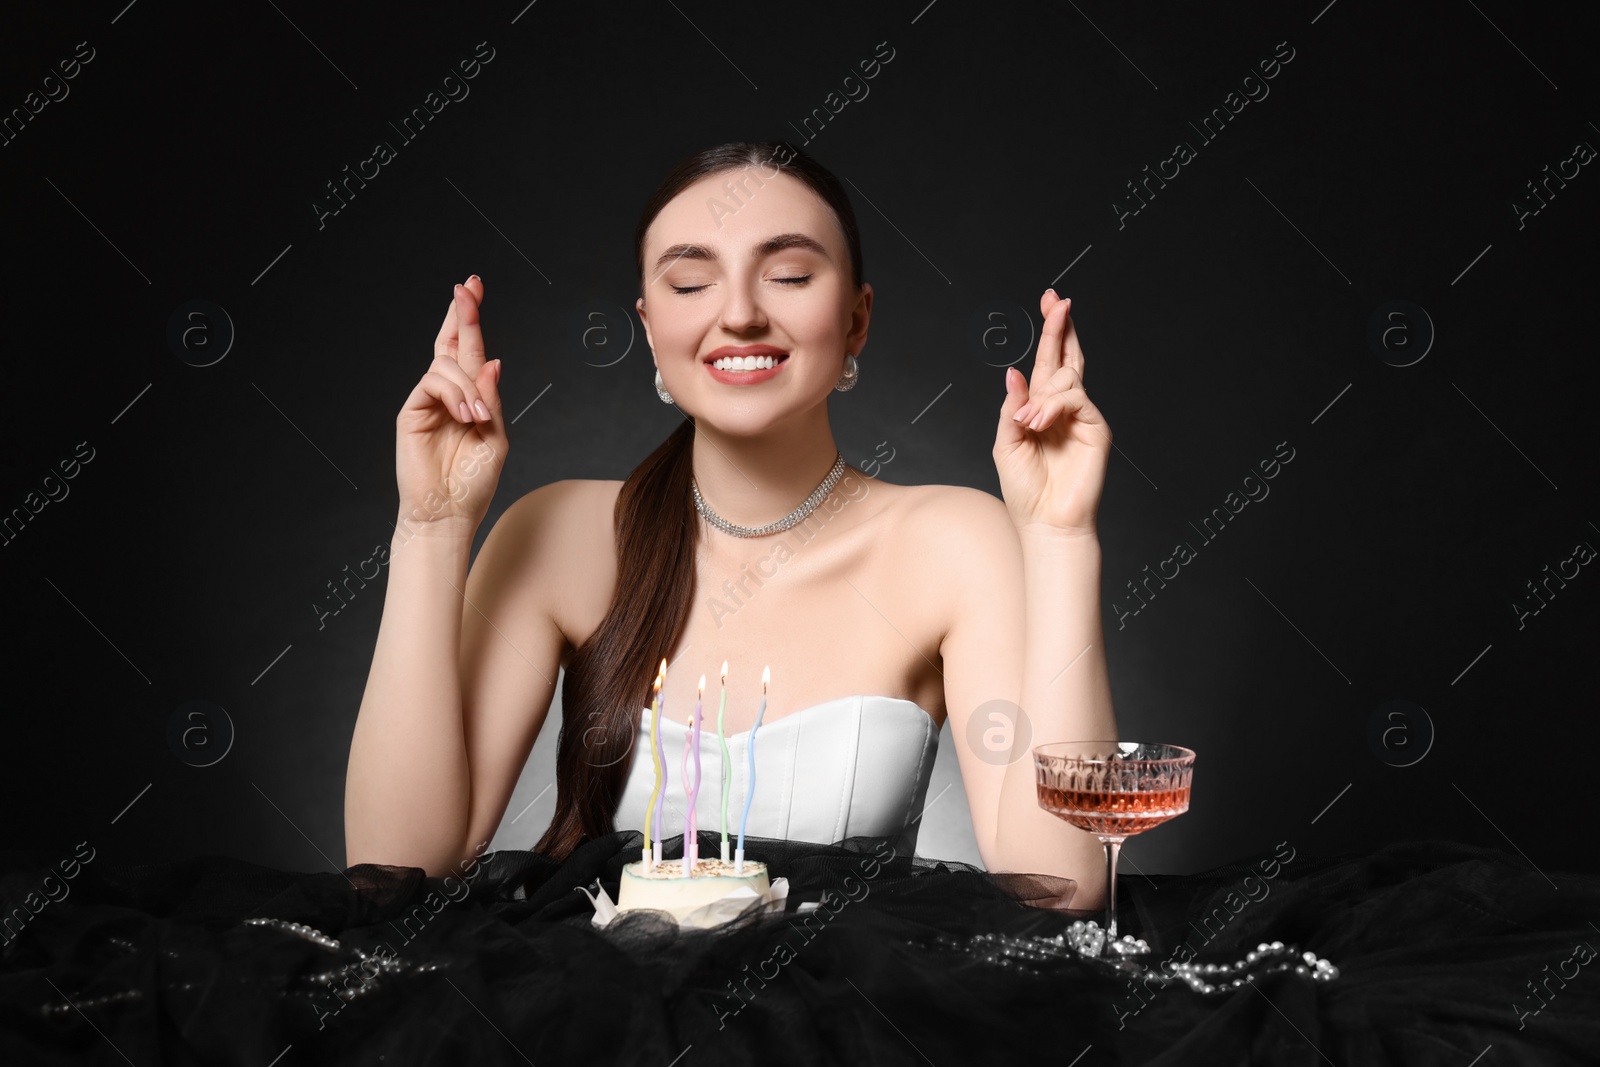 Photo of Fashionable photo of attractive young woman making wish with her Birthday cake on black background